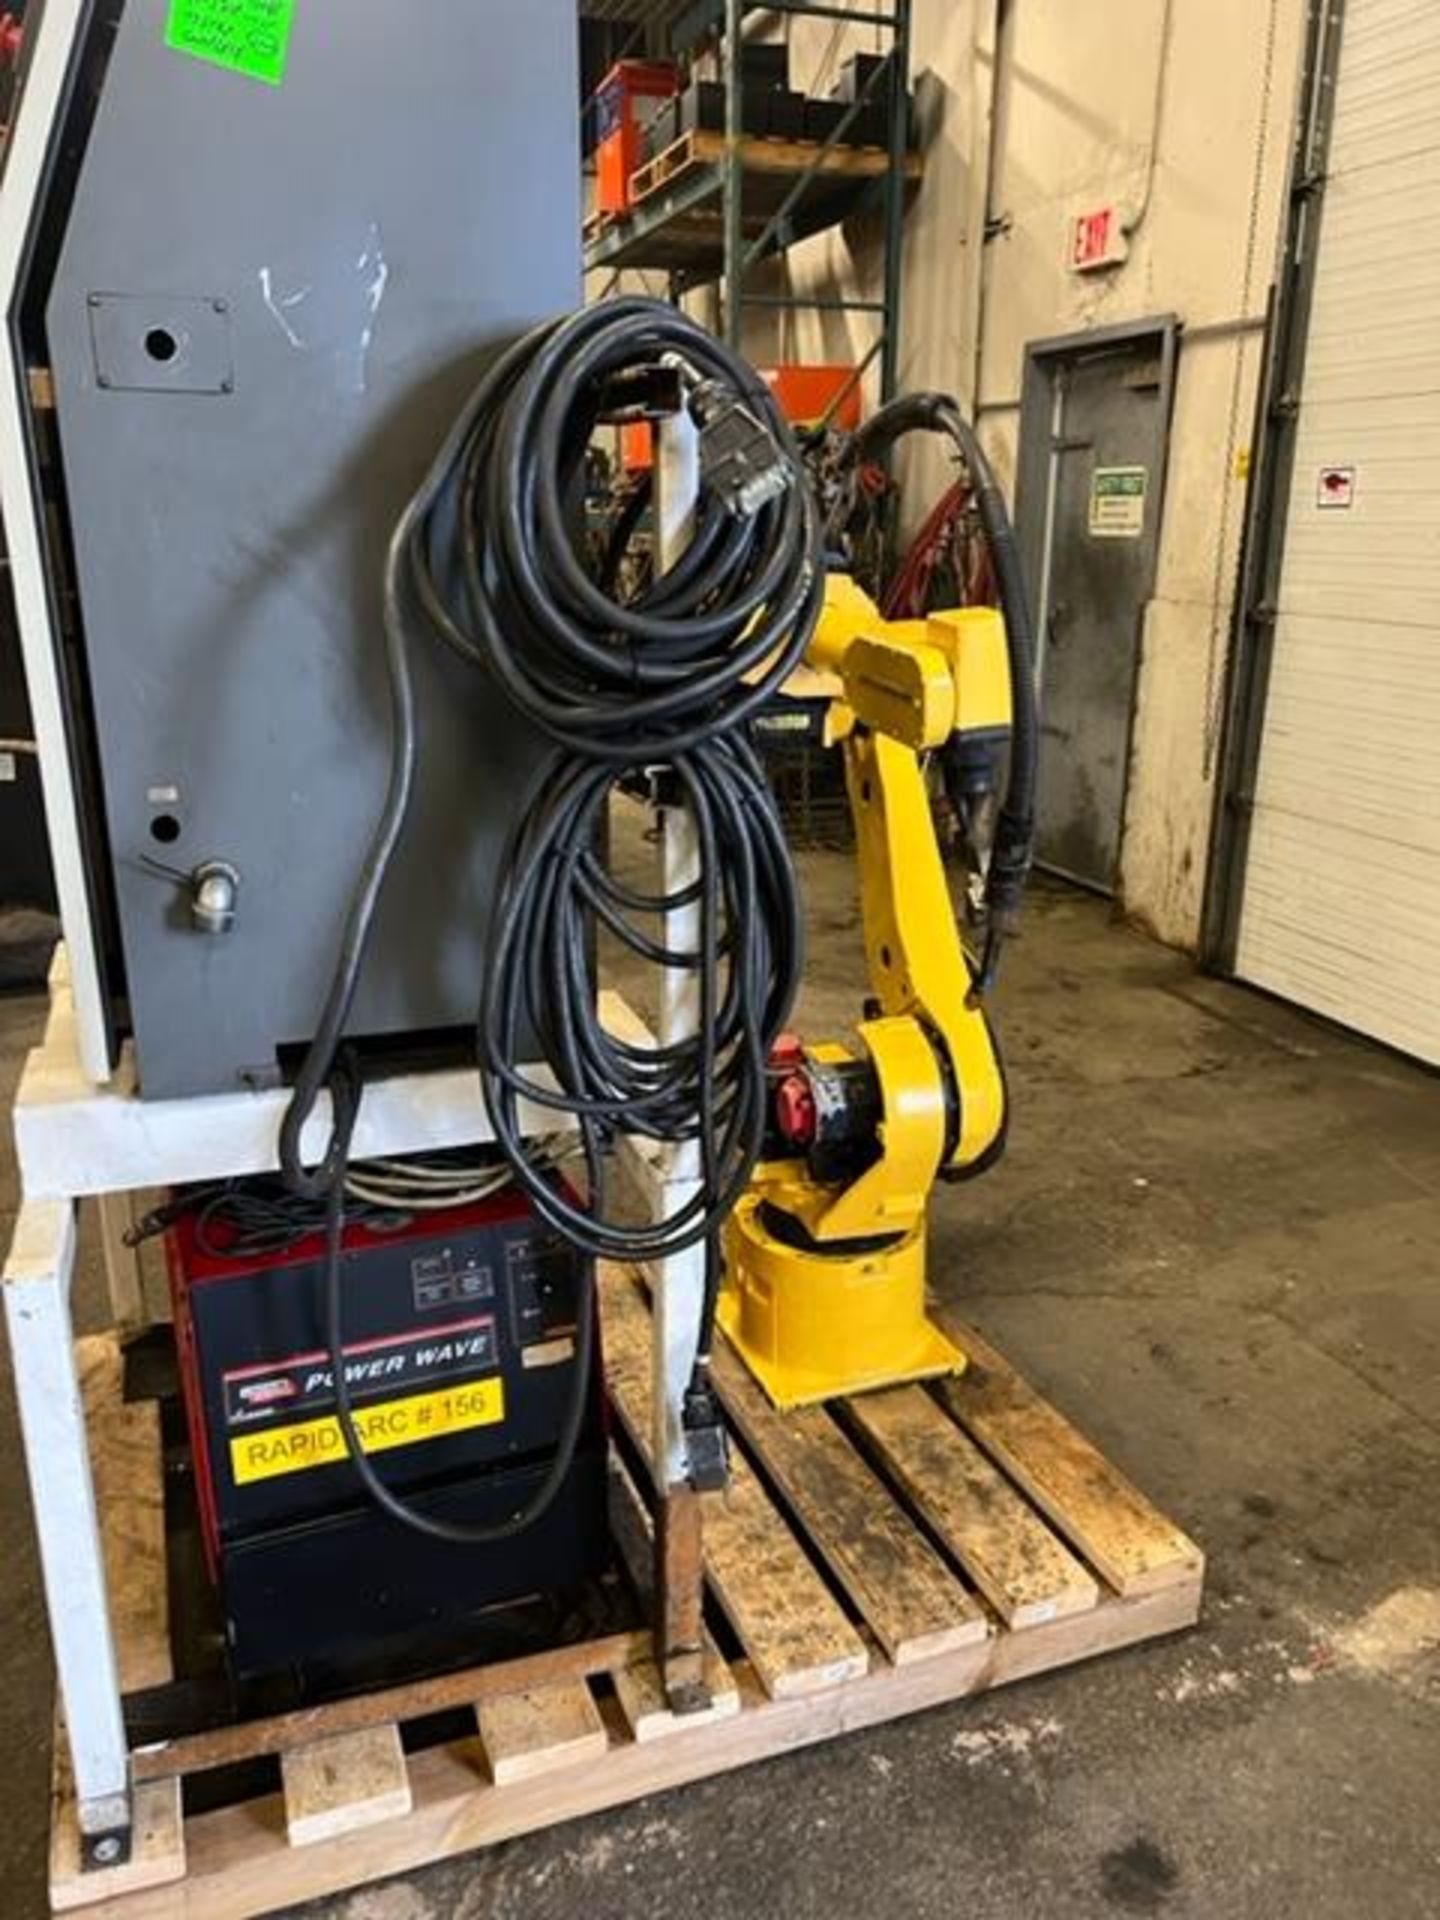 MINT Fanuc Arcmate 120iB Welding Robot with RJ3iB Controller WITH wire feeder, COMPLETE & TESTED